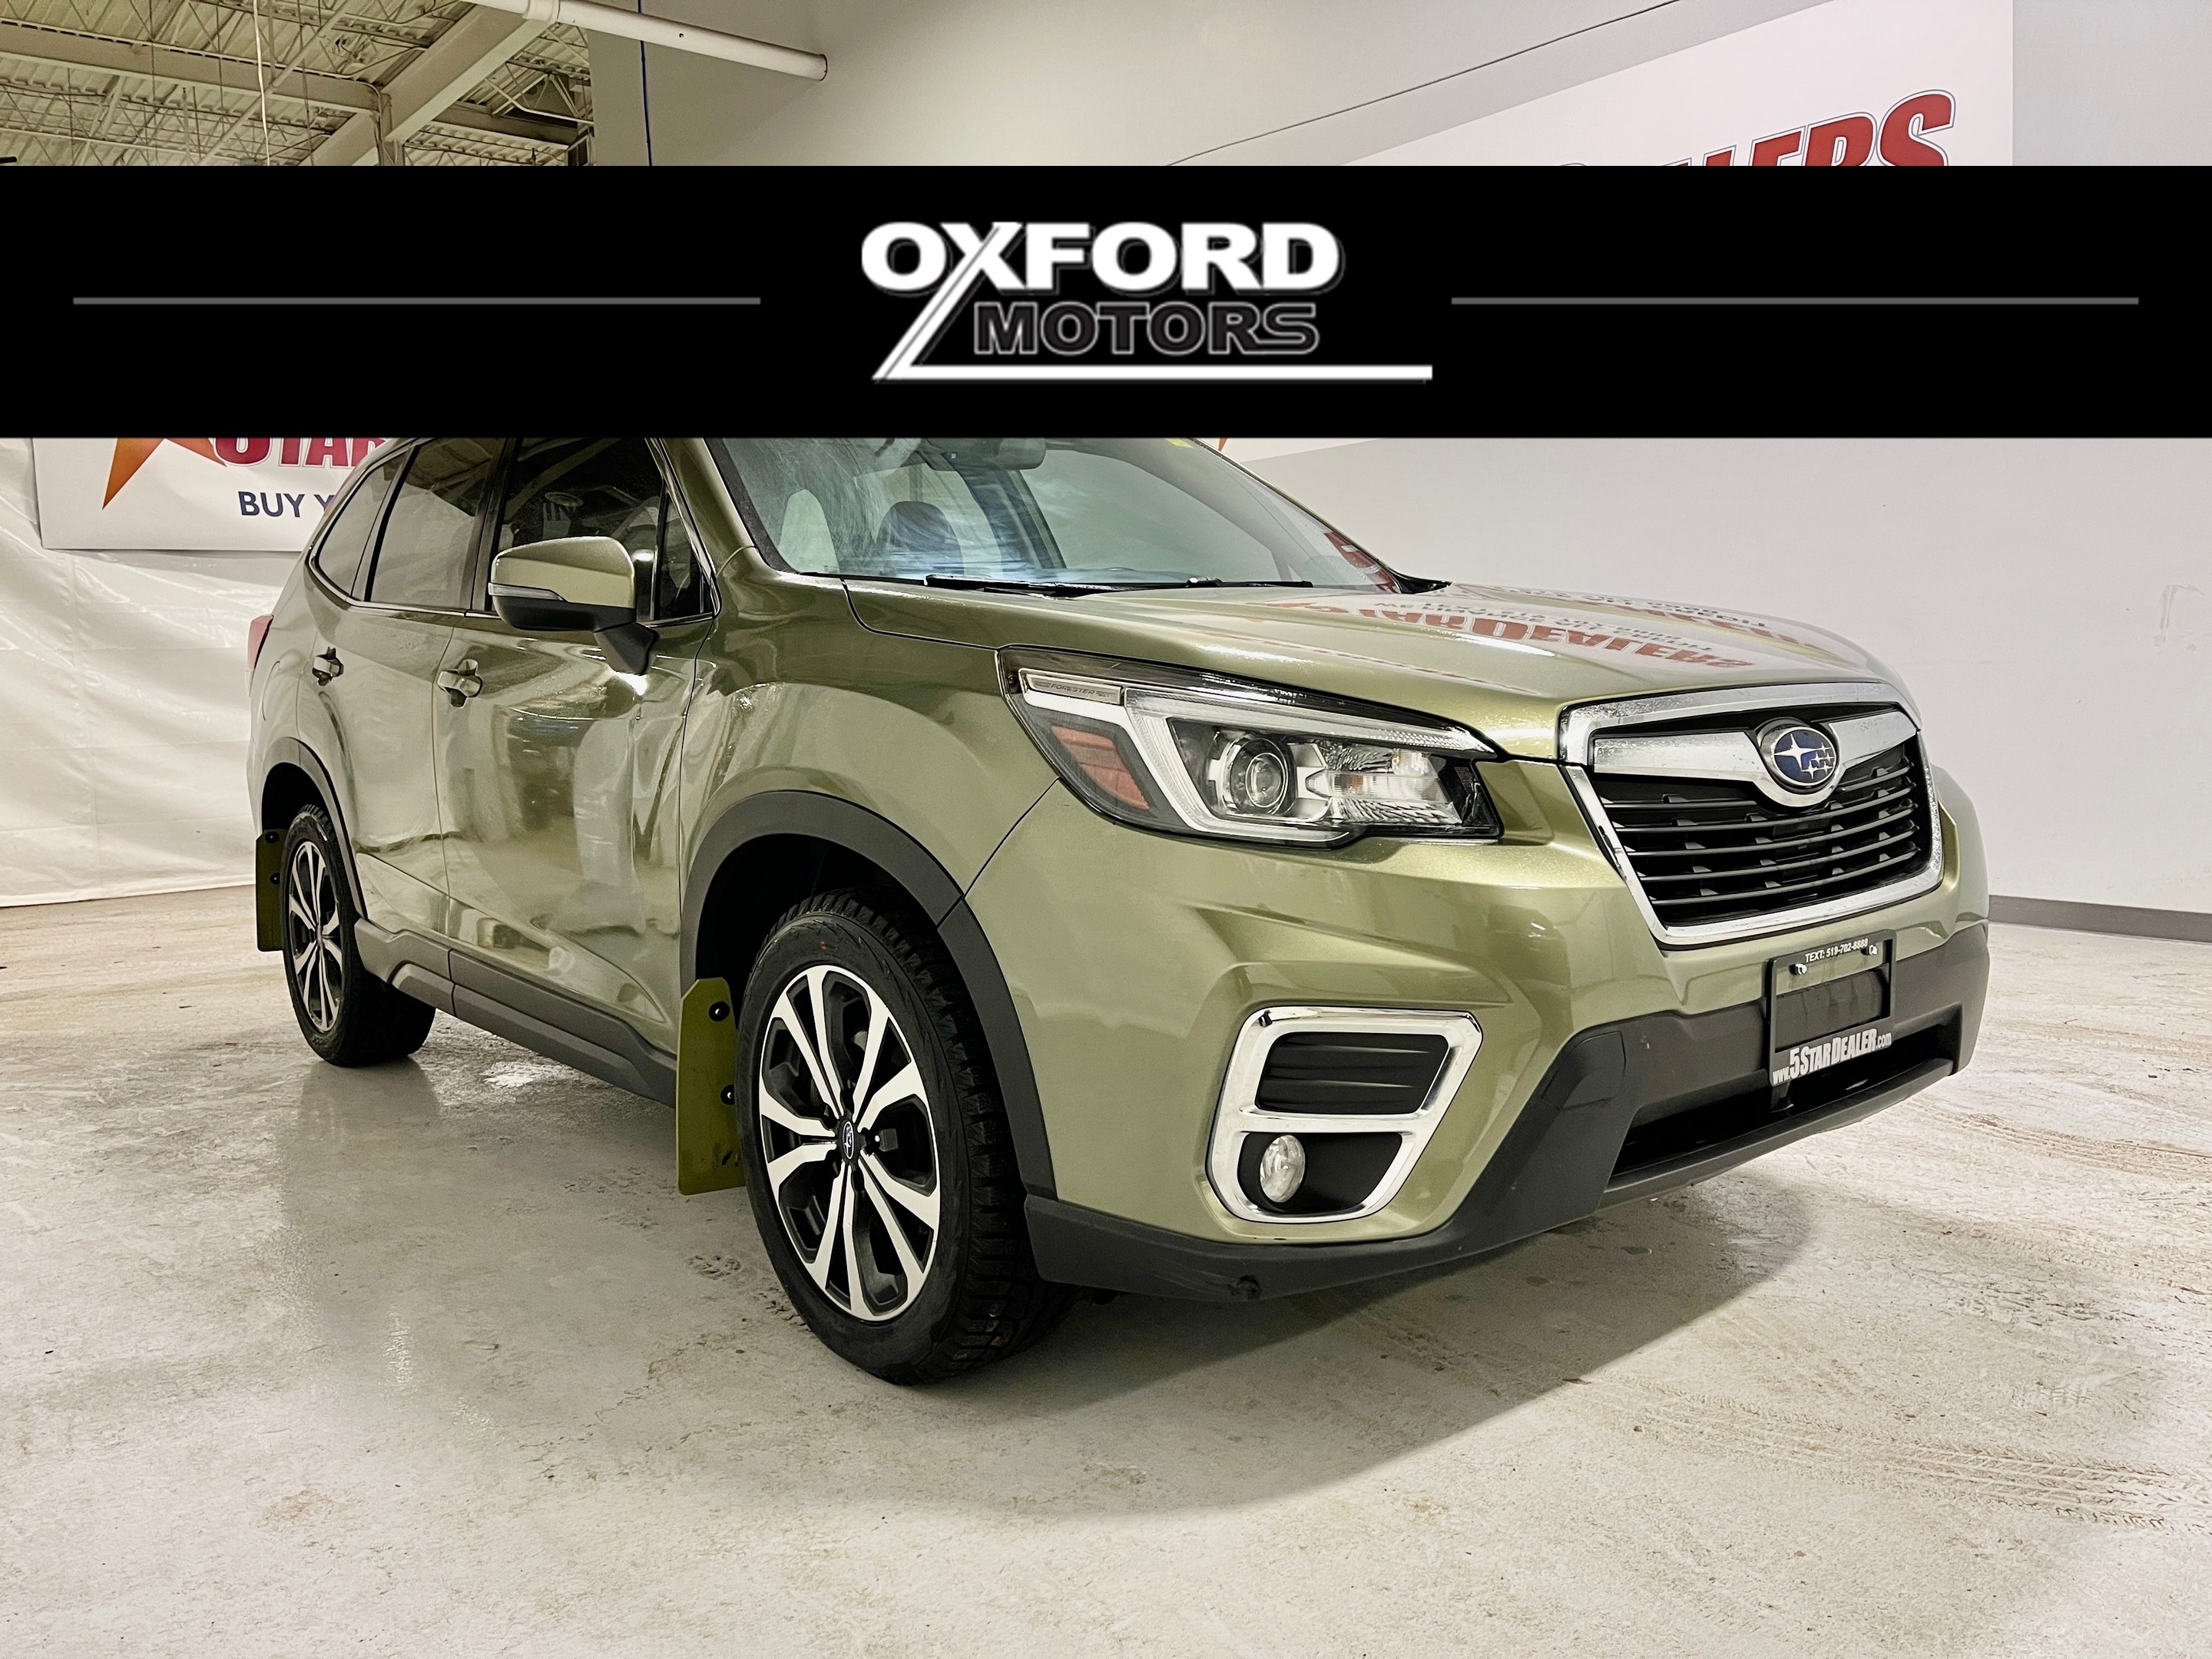 2019 Subaru Forester NAV LEATHER PANO ROOF MINT! WE FINANCE ALL CREDIT!